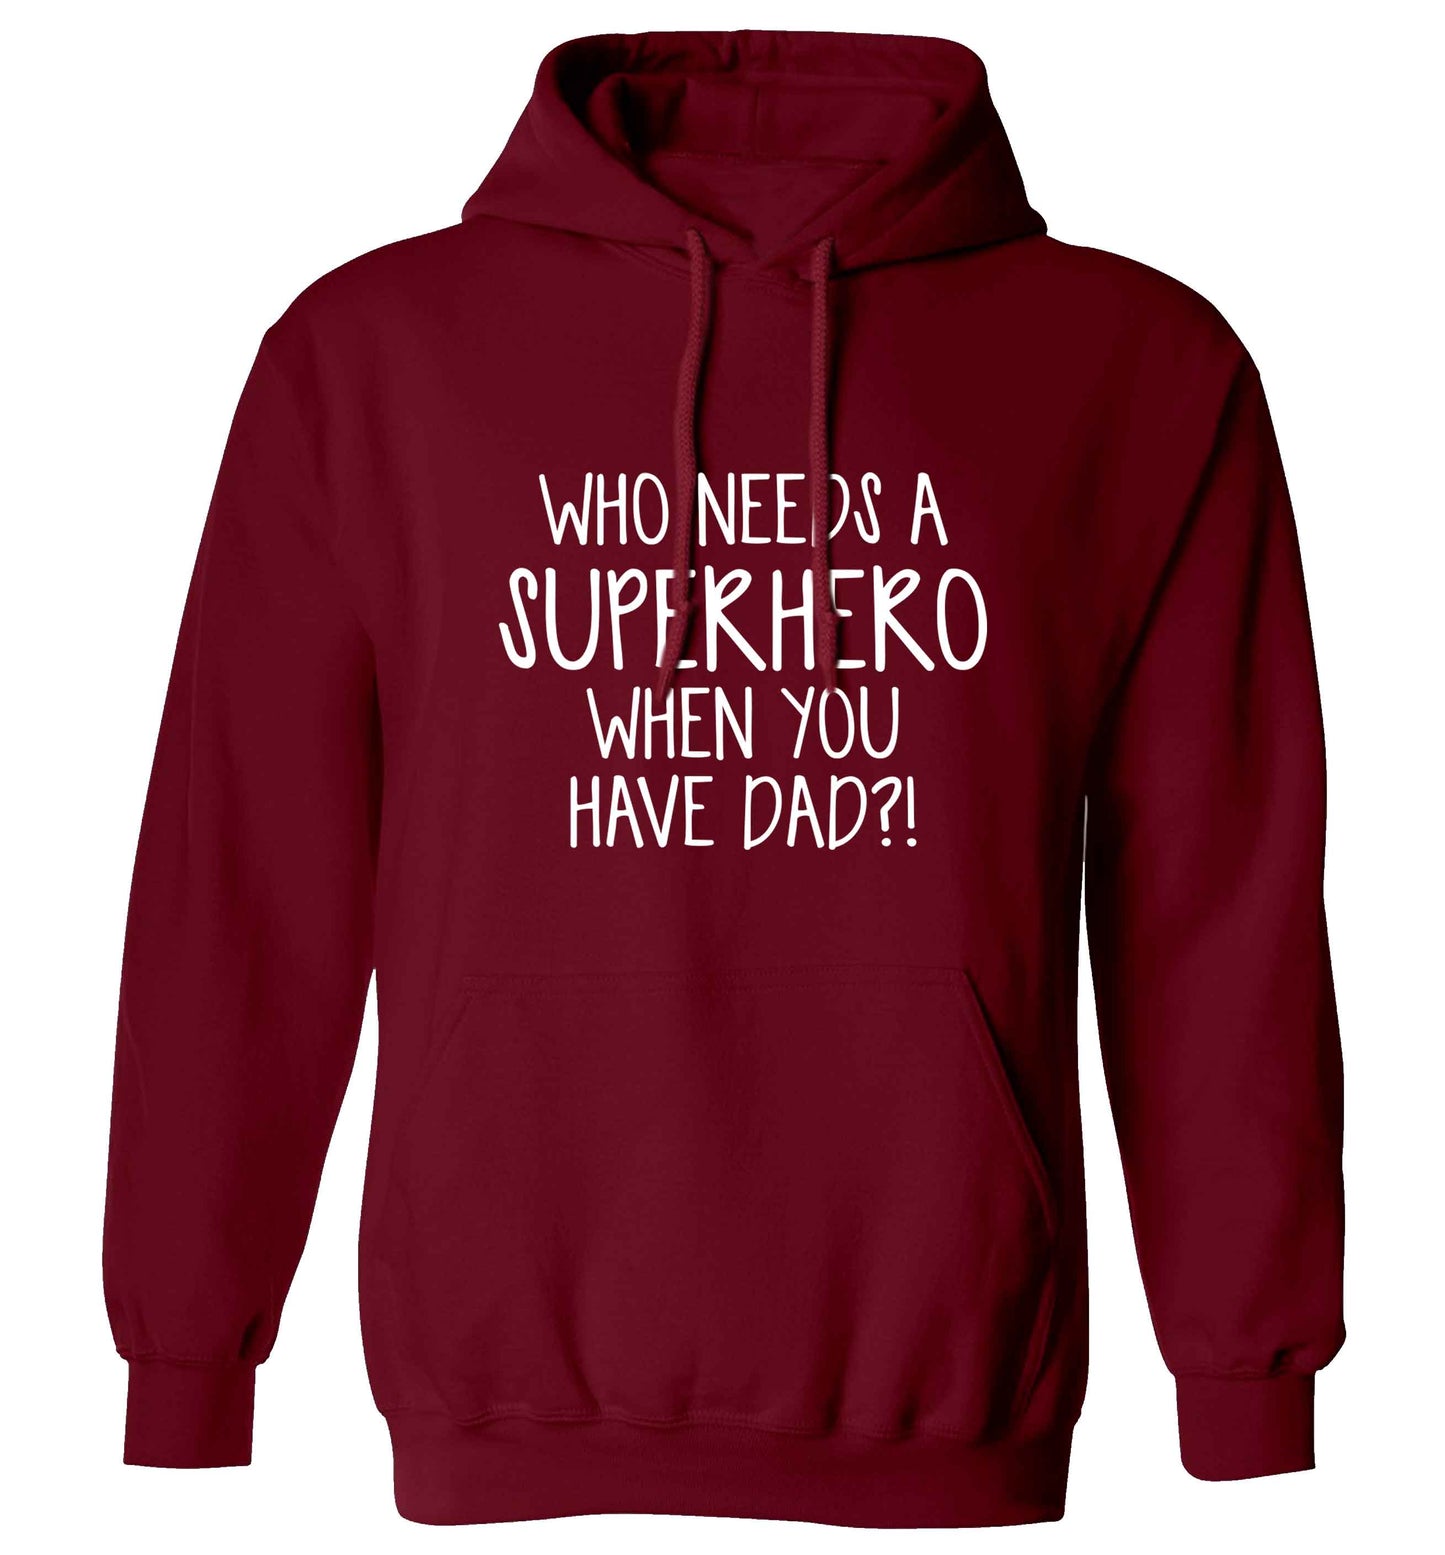 Who needs a superhero when you have dad! adults unisex maroon hoodie 2XL